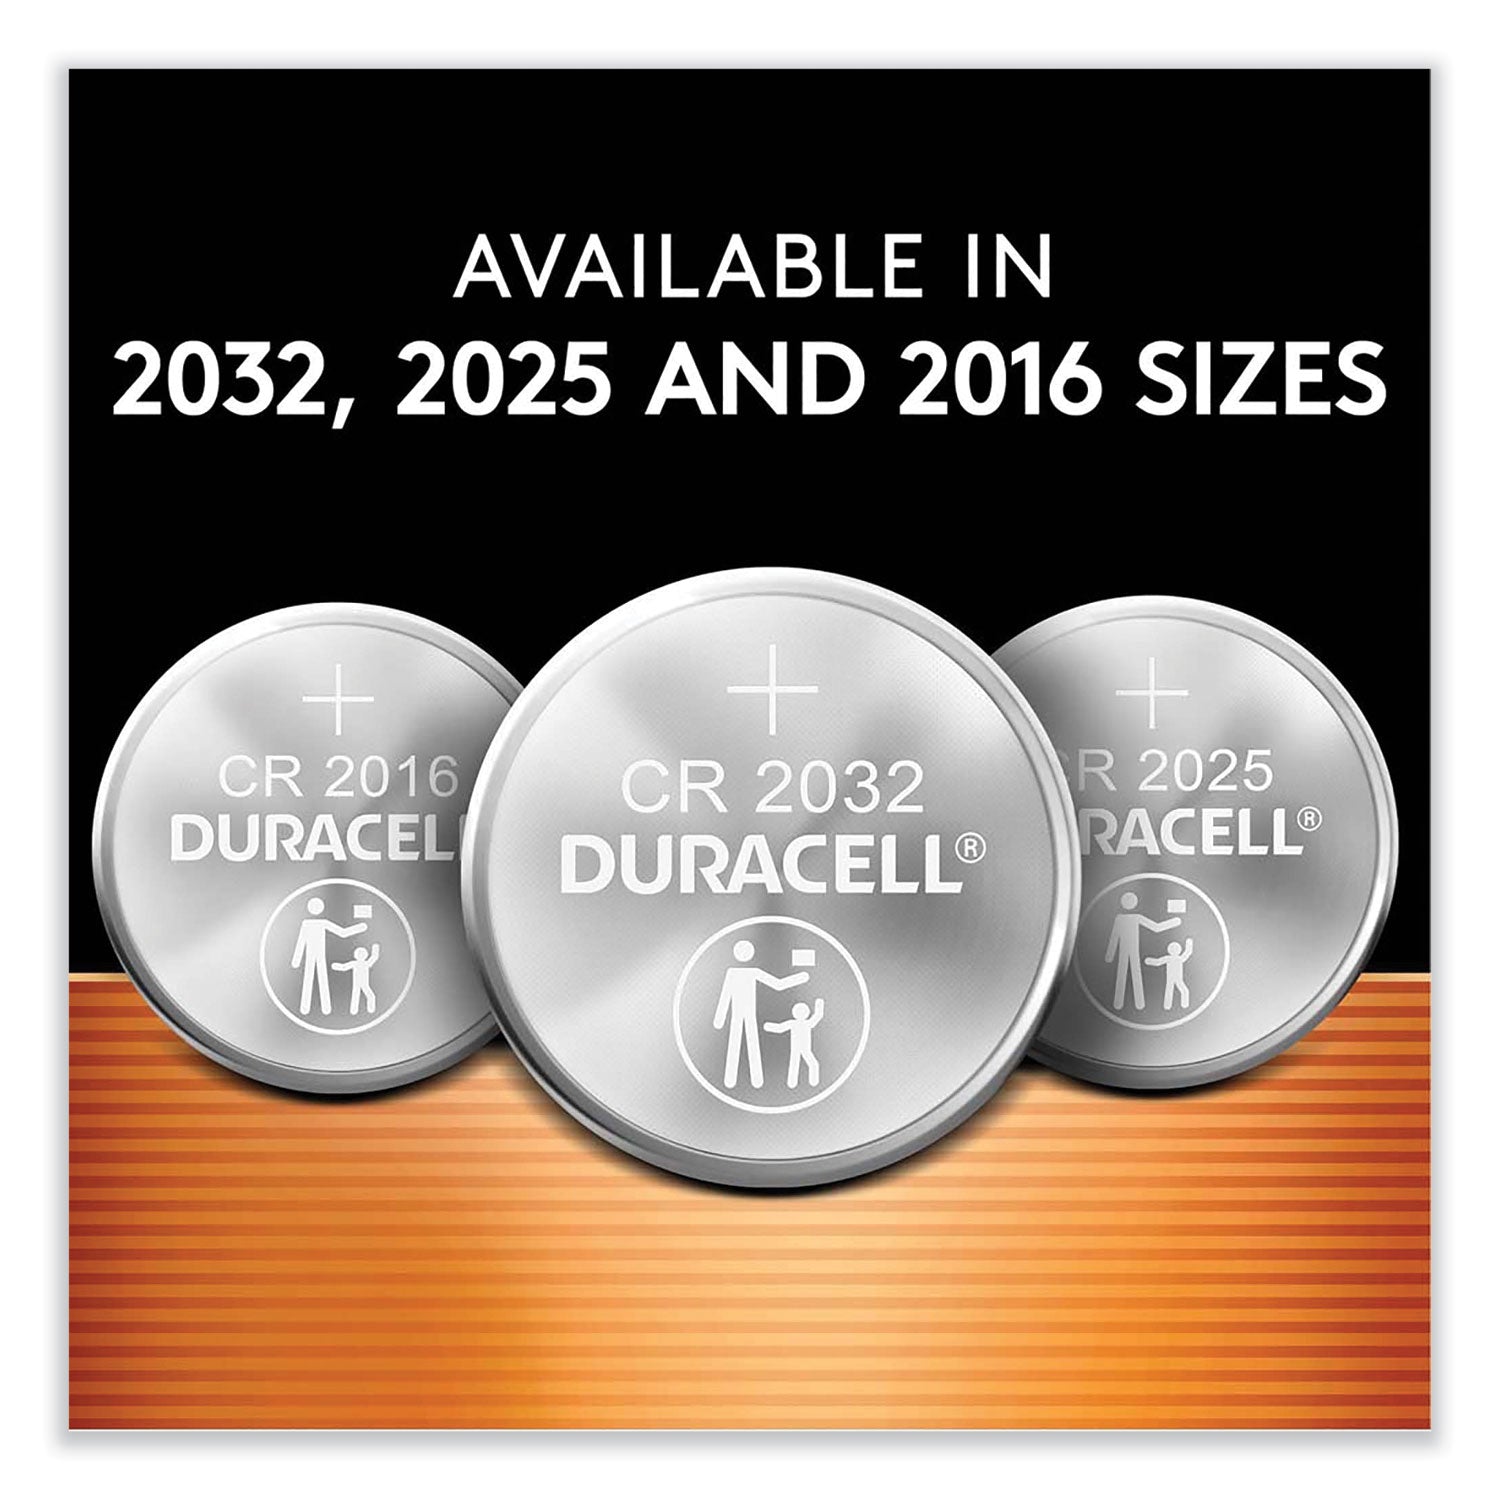 lithium-coin-batteries-with-bitterant-2025-4-pack_durdl2025b4pk - 5